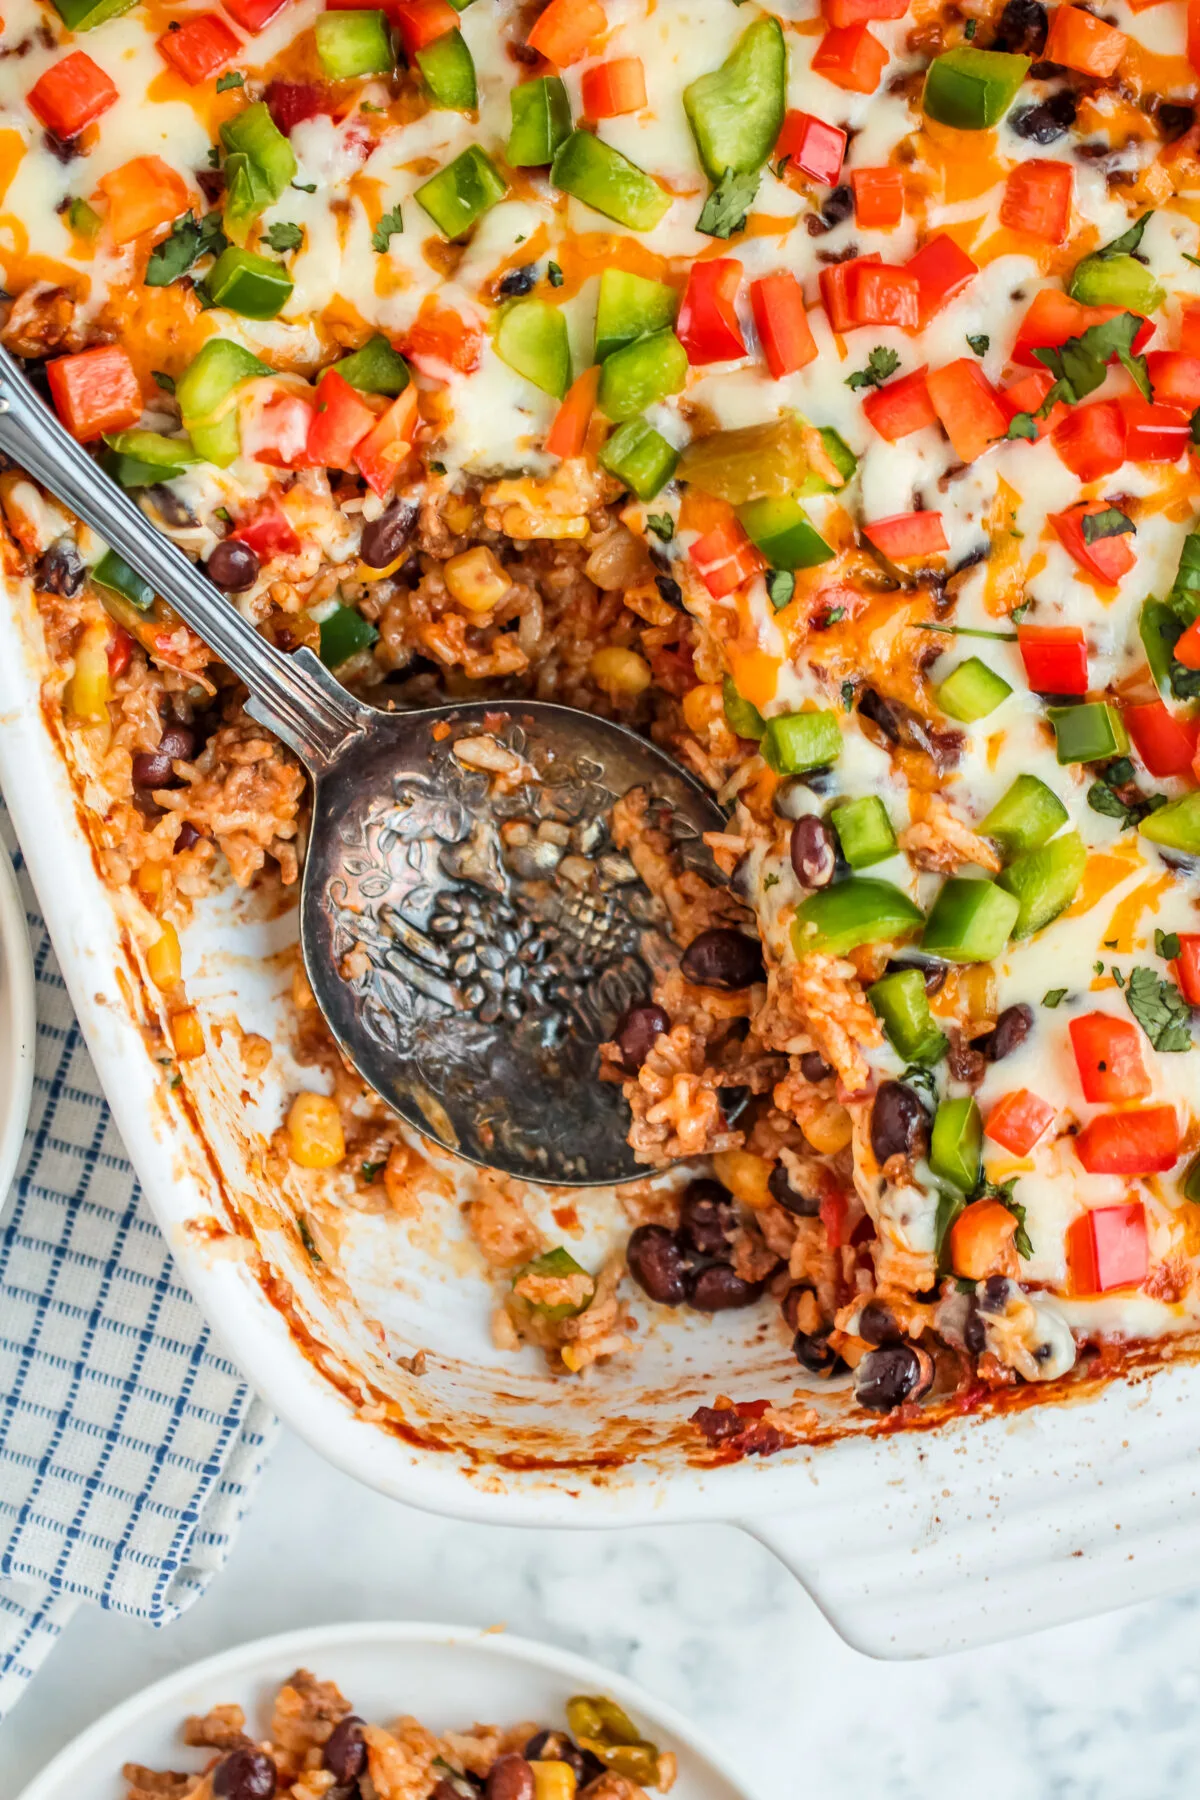 This easy Mexican ground beef casserole recipe is perfect for a weeknight meal! It's a hearty, comforting, and delicious casserole.